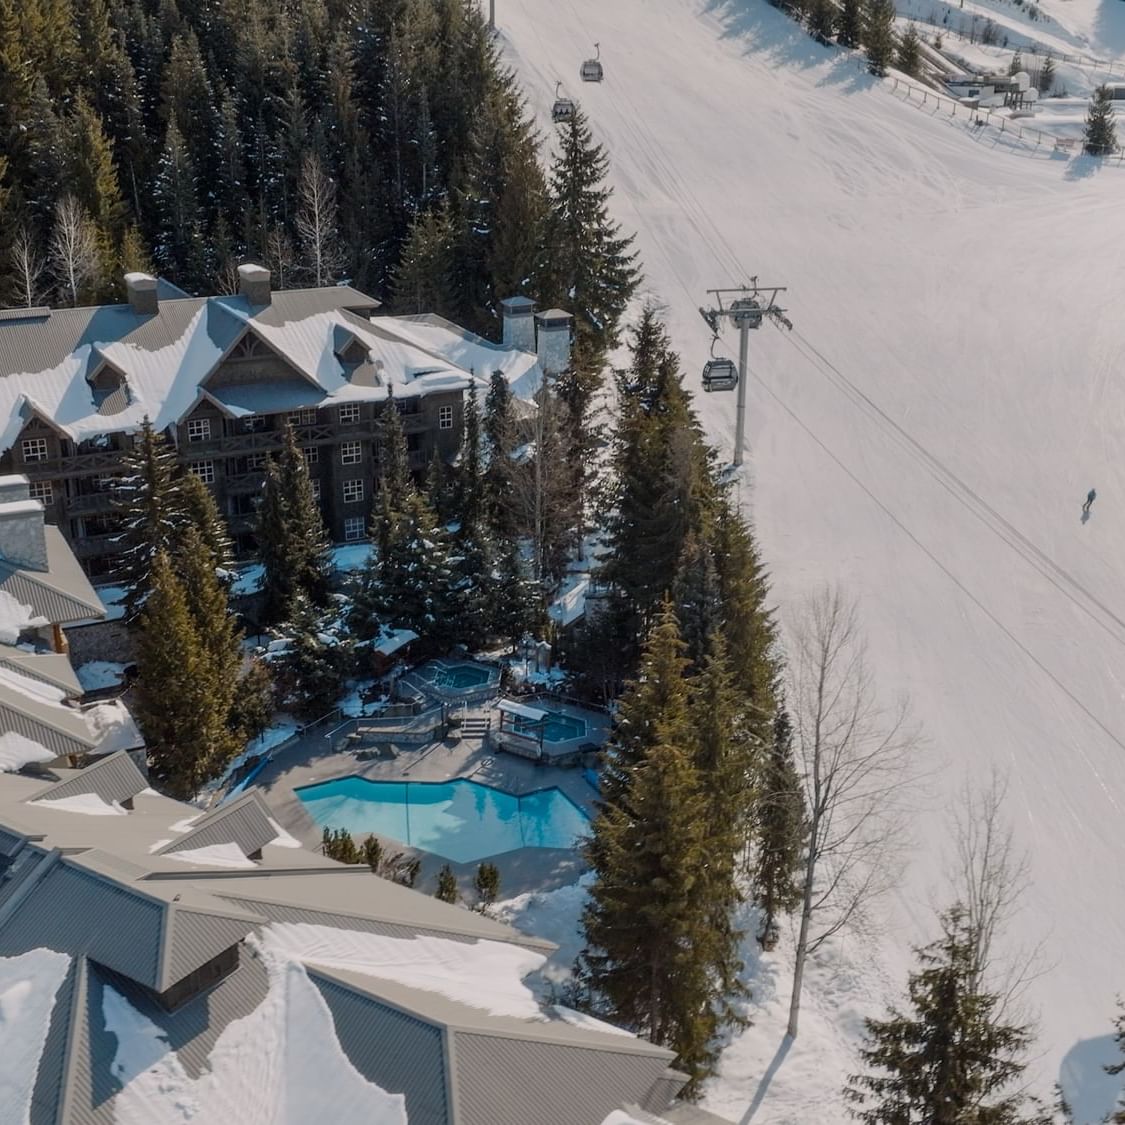 Aerial view of Blackcomb Springs Suites & outdoor pool with skiing slopes